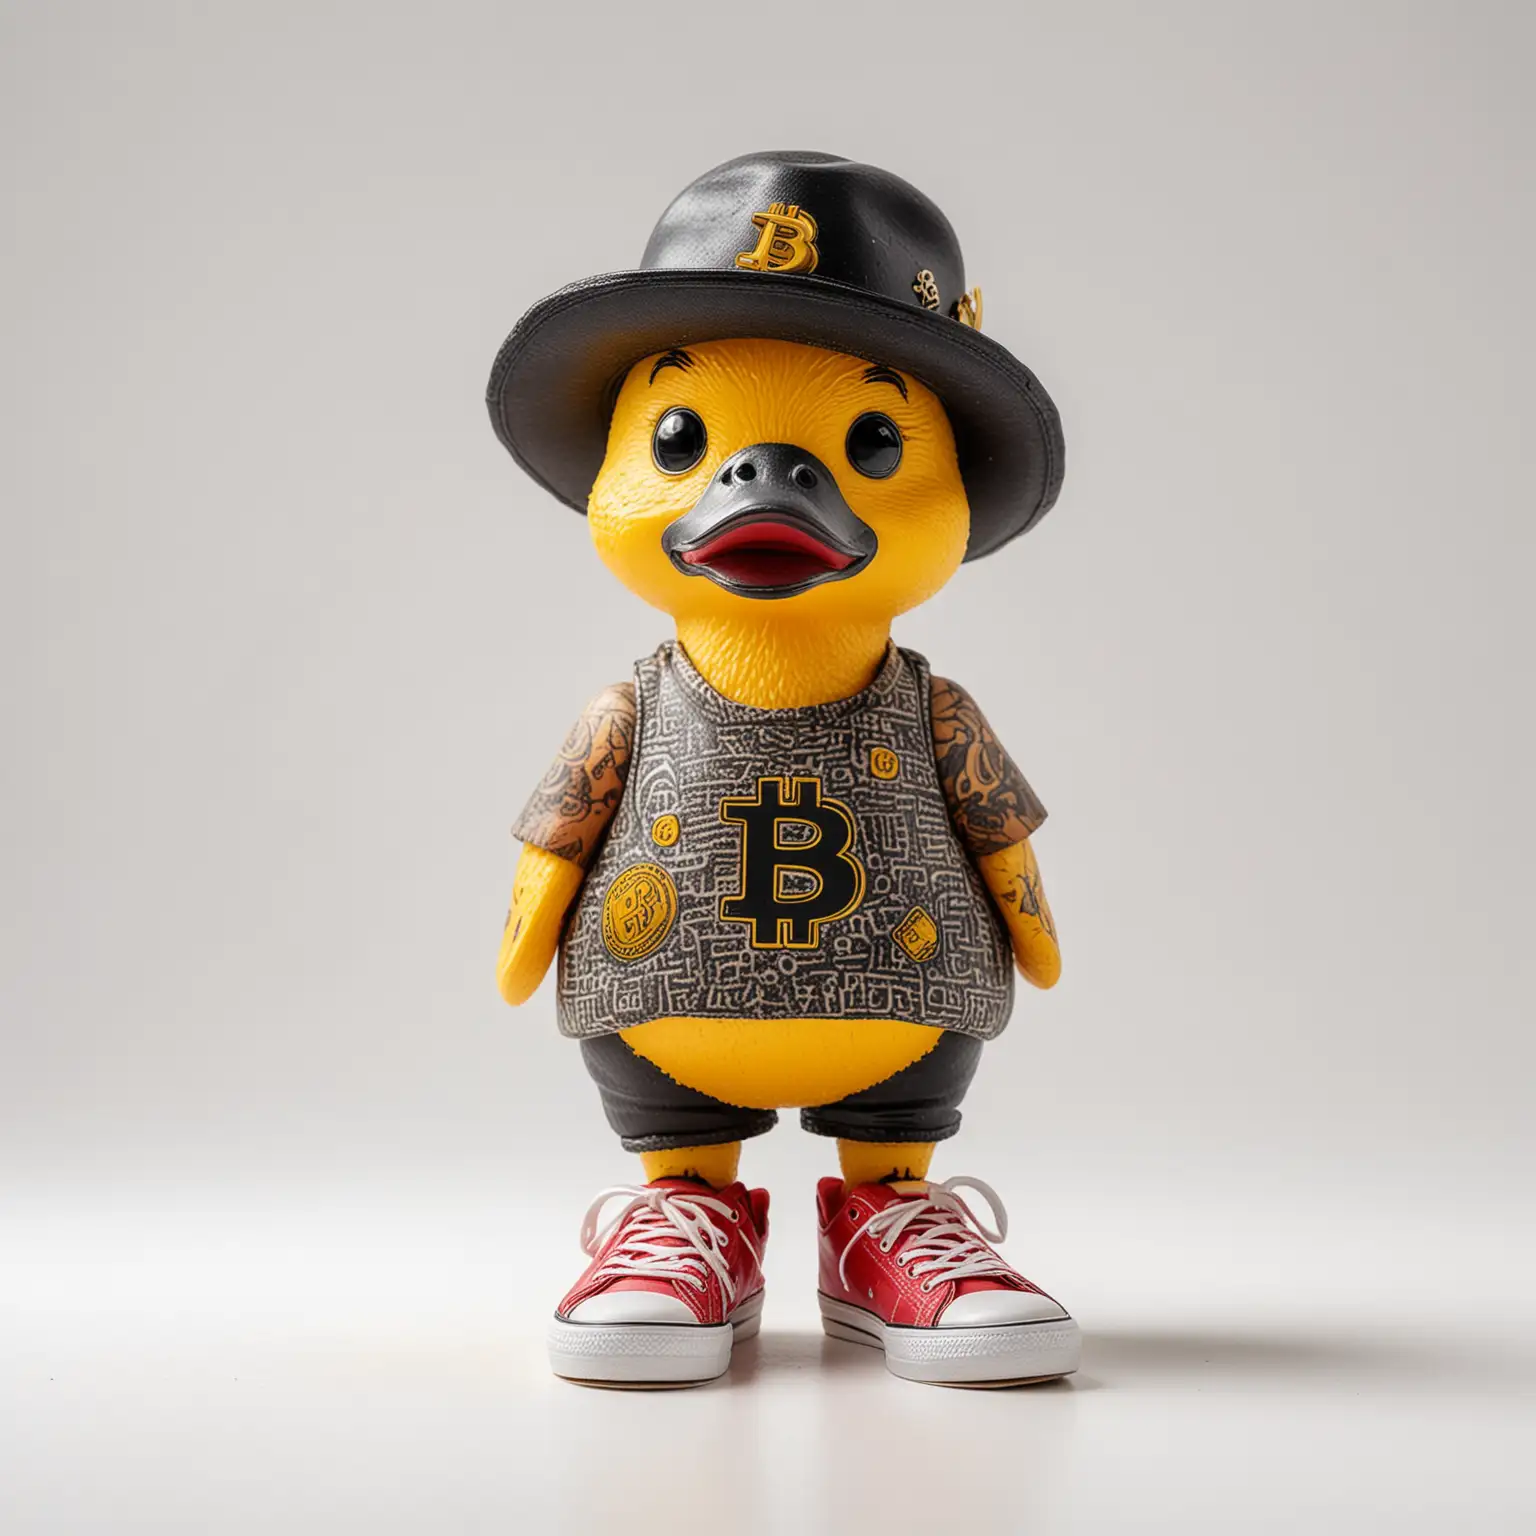 bitcoin yellow duck standing with a hat and tattooed and wearing sneakers on a white background